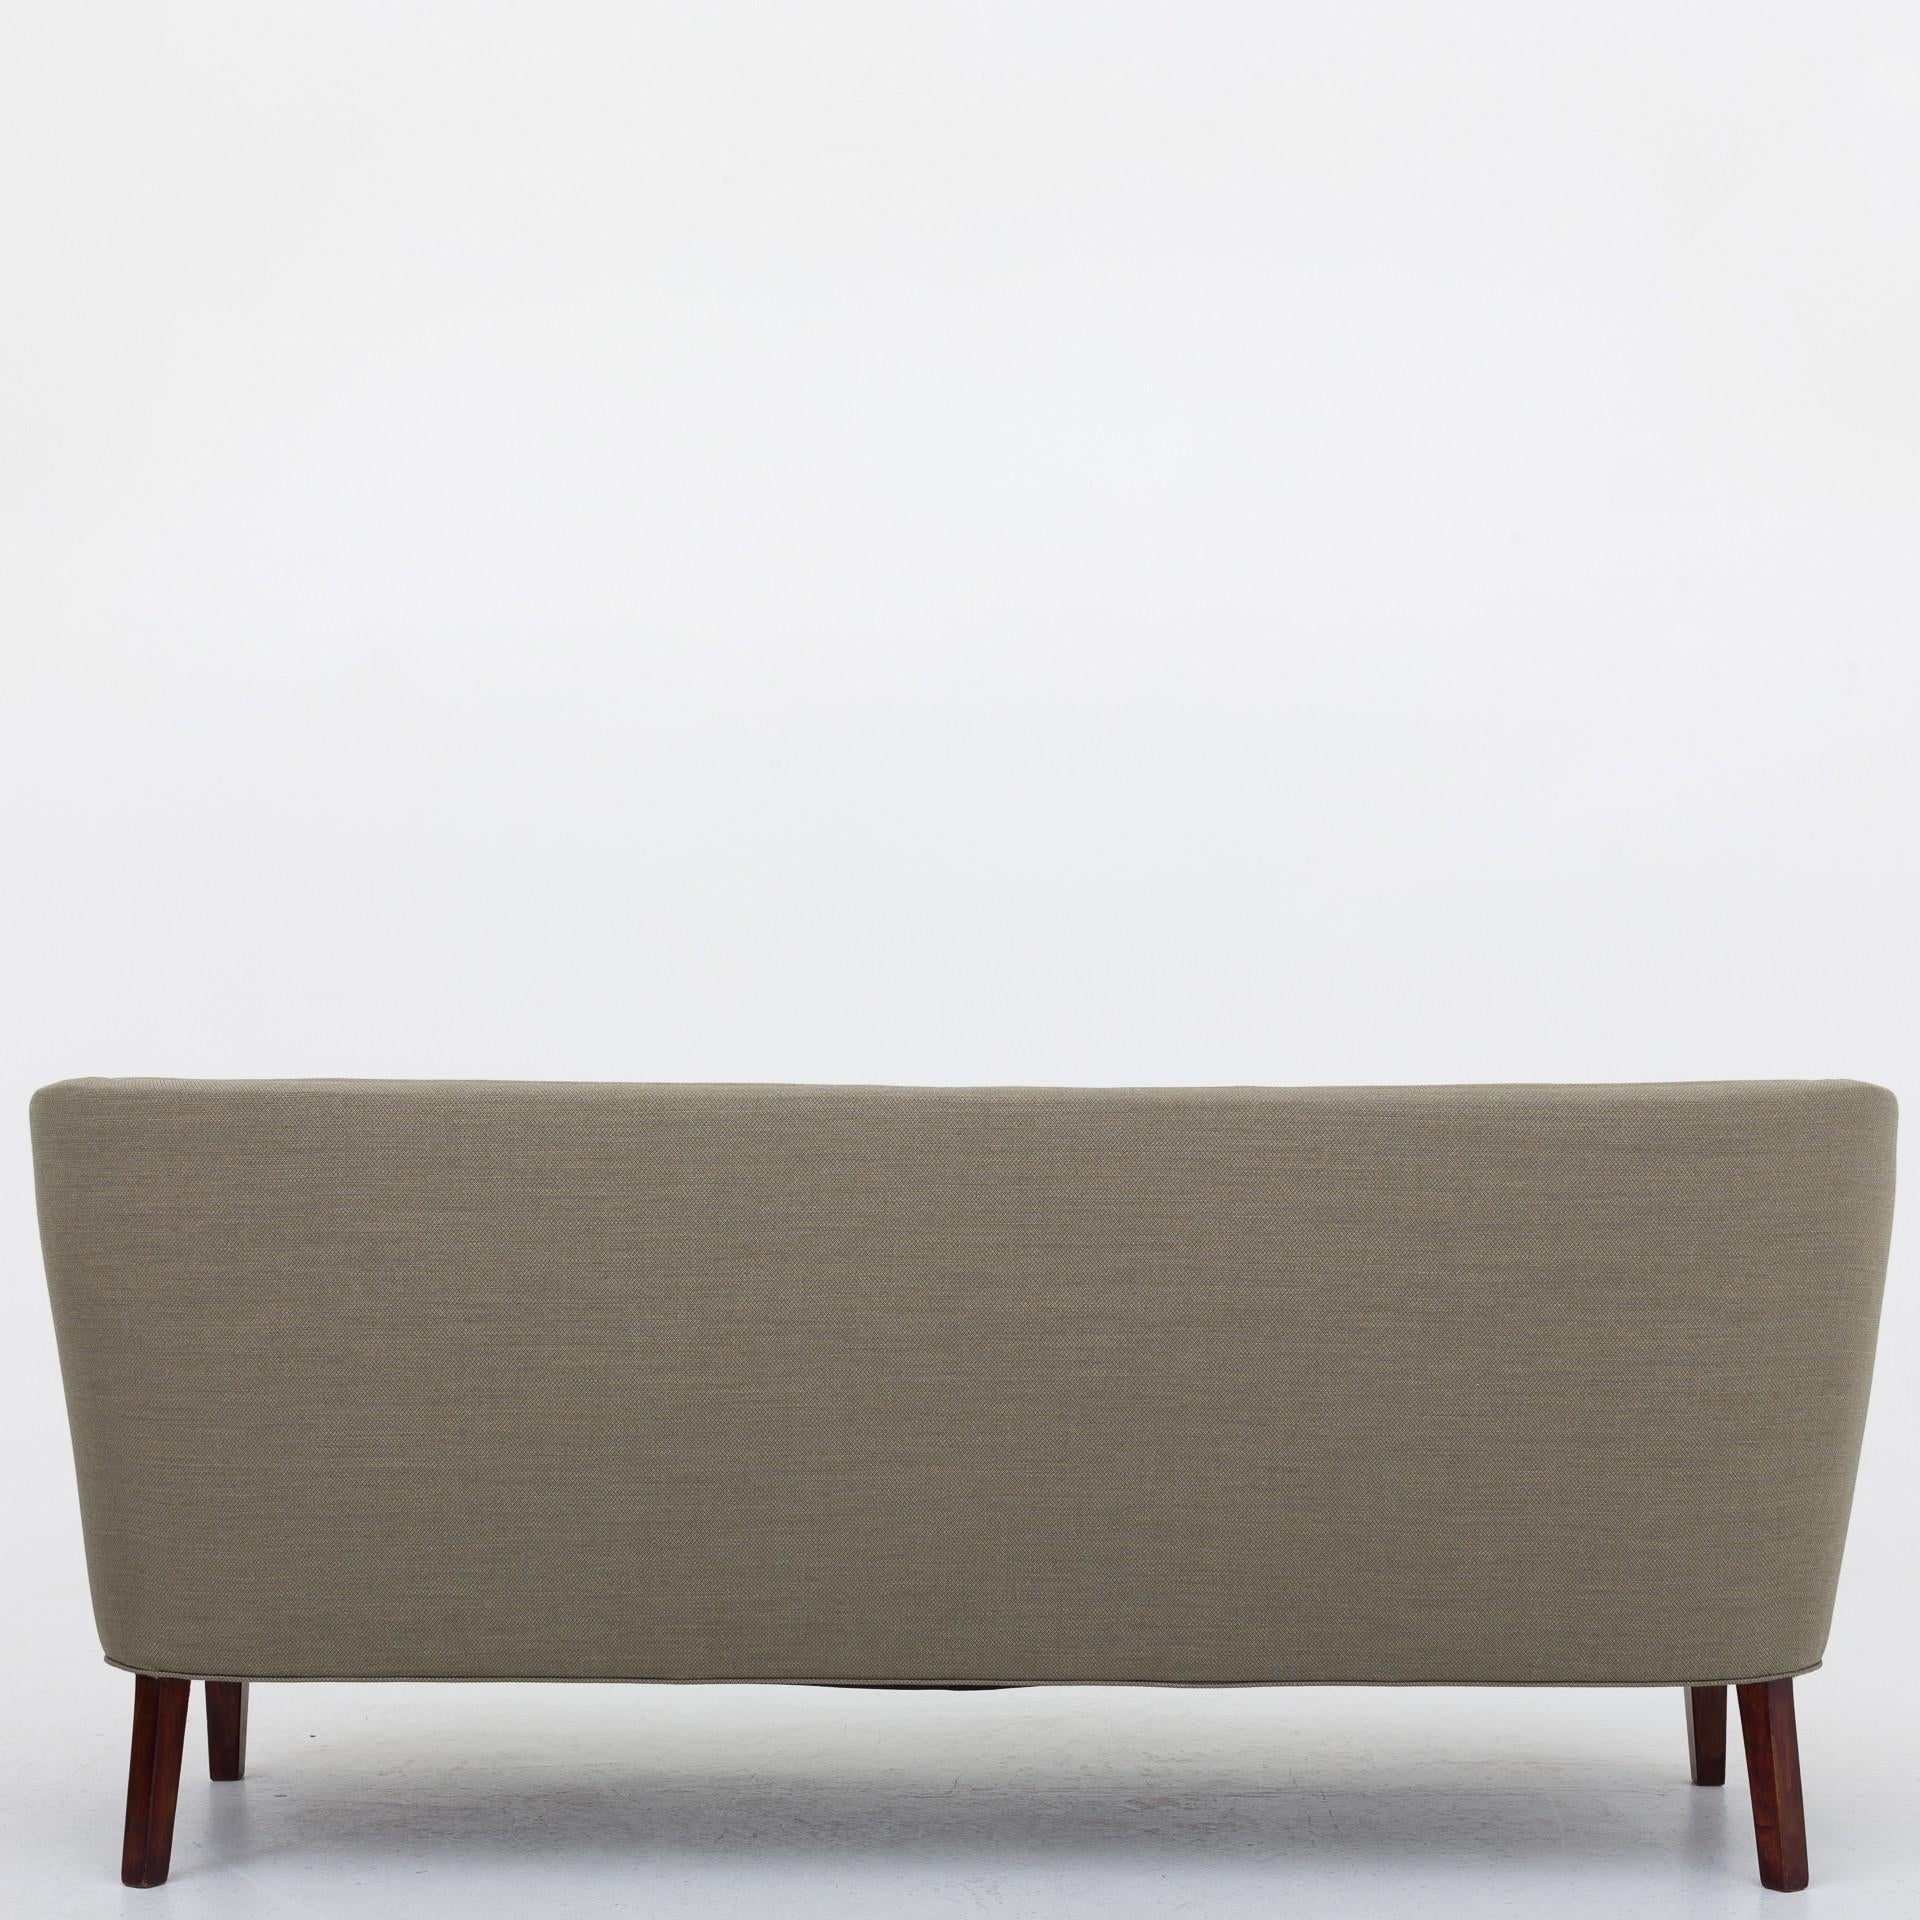 Three-seat sofa, reupholstered with Fiord 951 (wool). Seat in Fiord 961. Legs in stained beech.